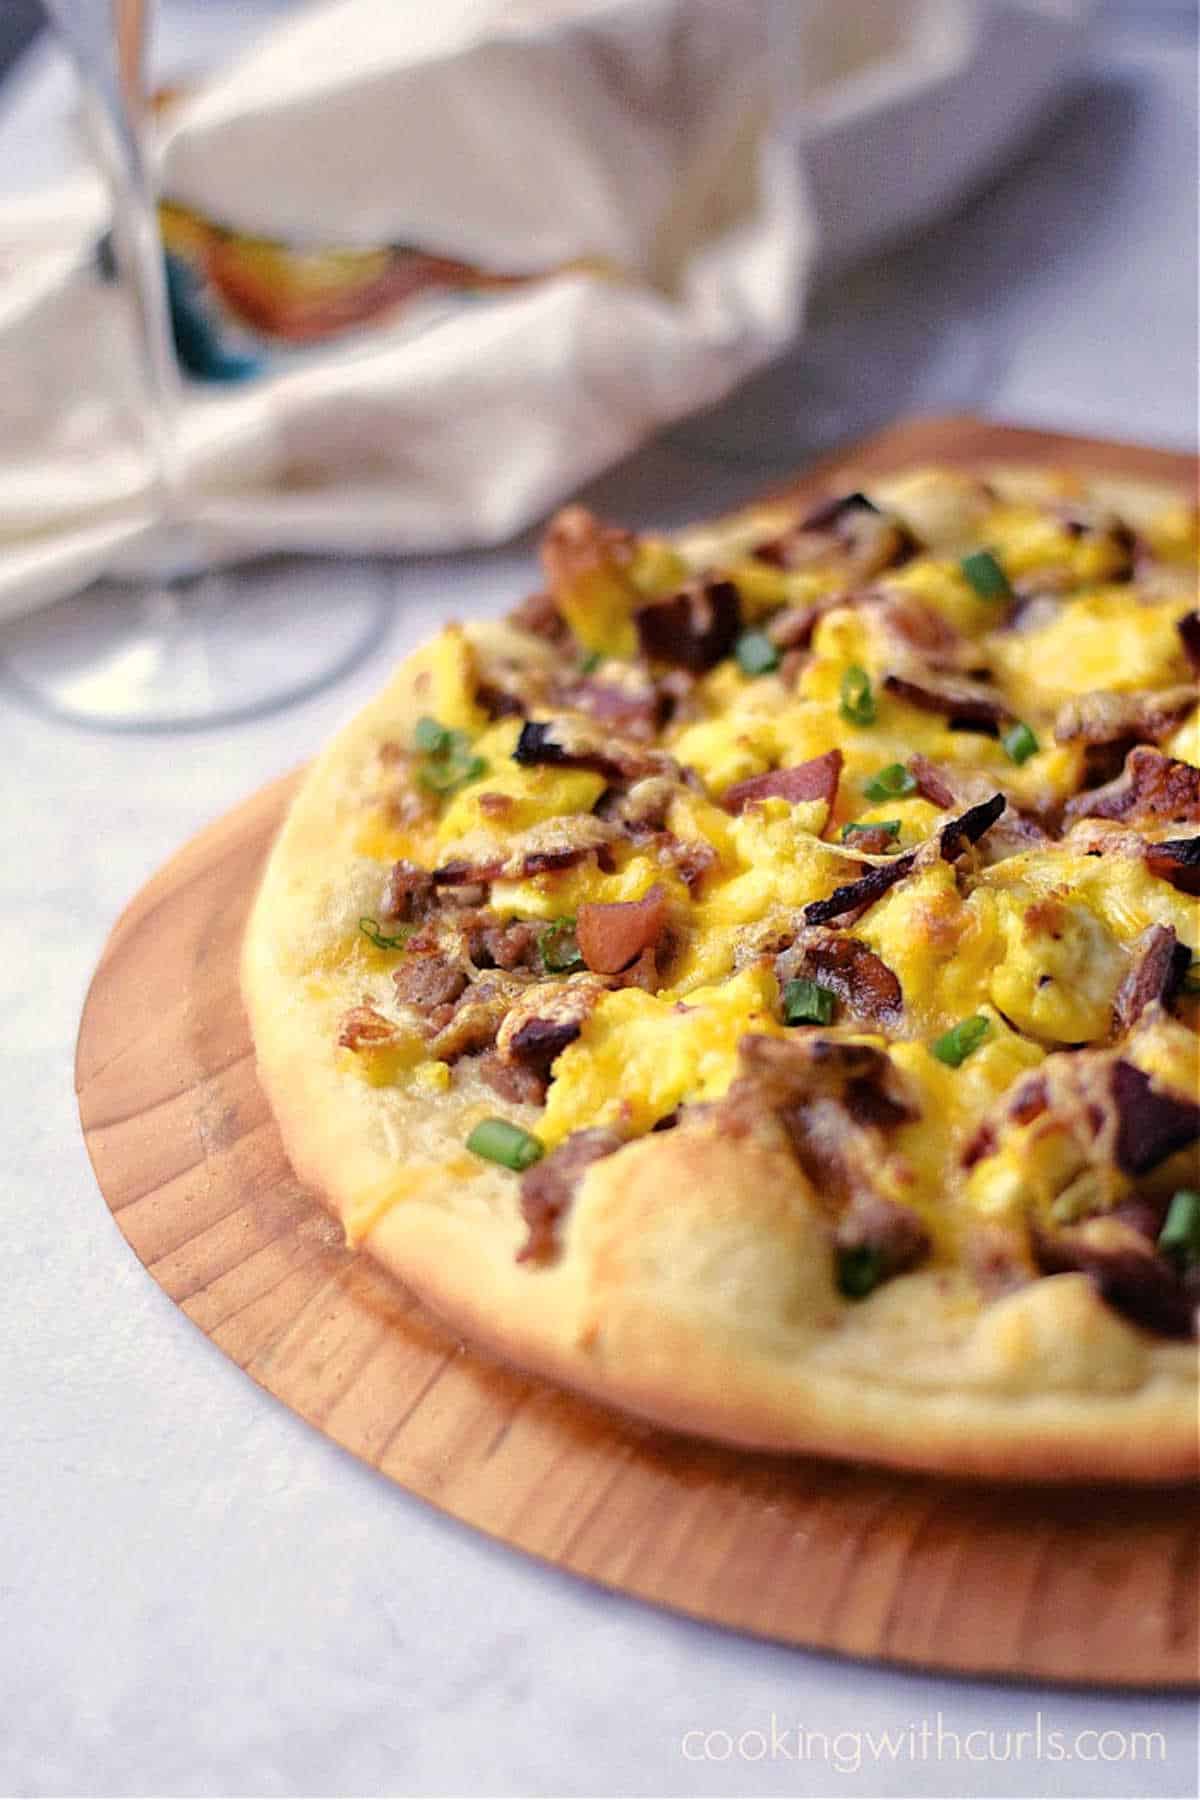 Breakfast Pizza with Sausage Gravy, scrambled eggs and bacon on a homemade pizza crust.